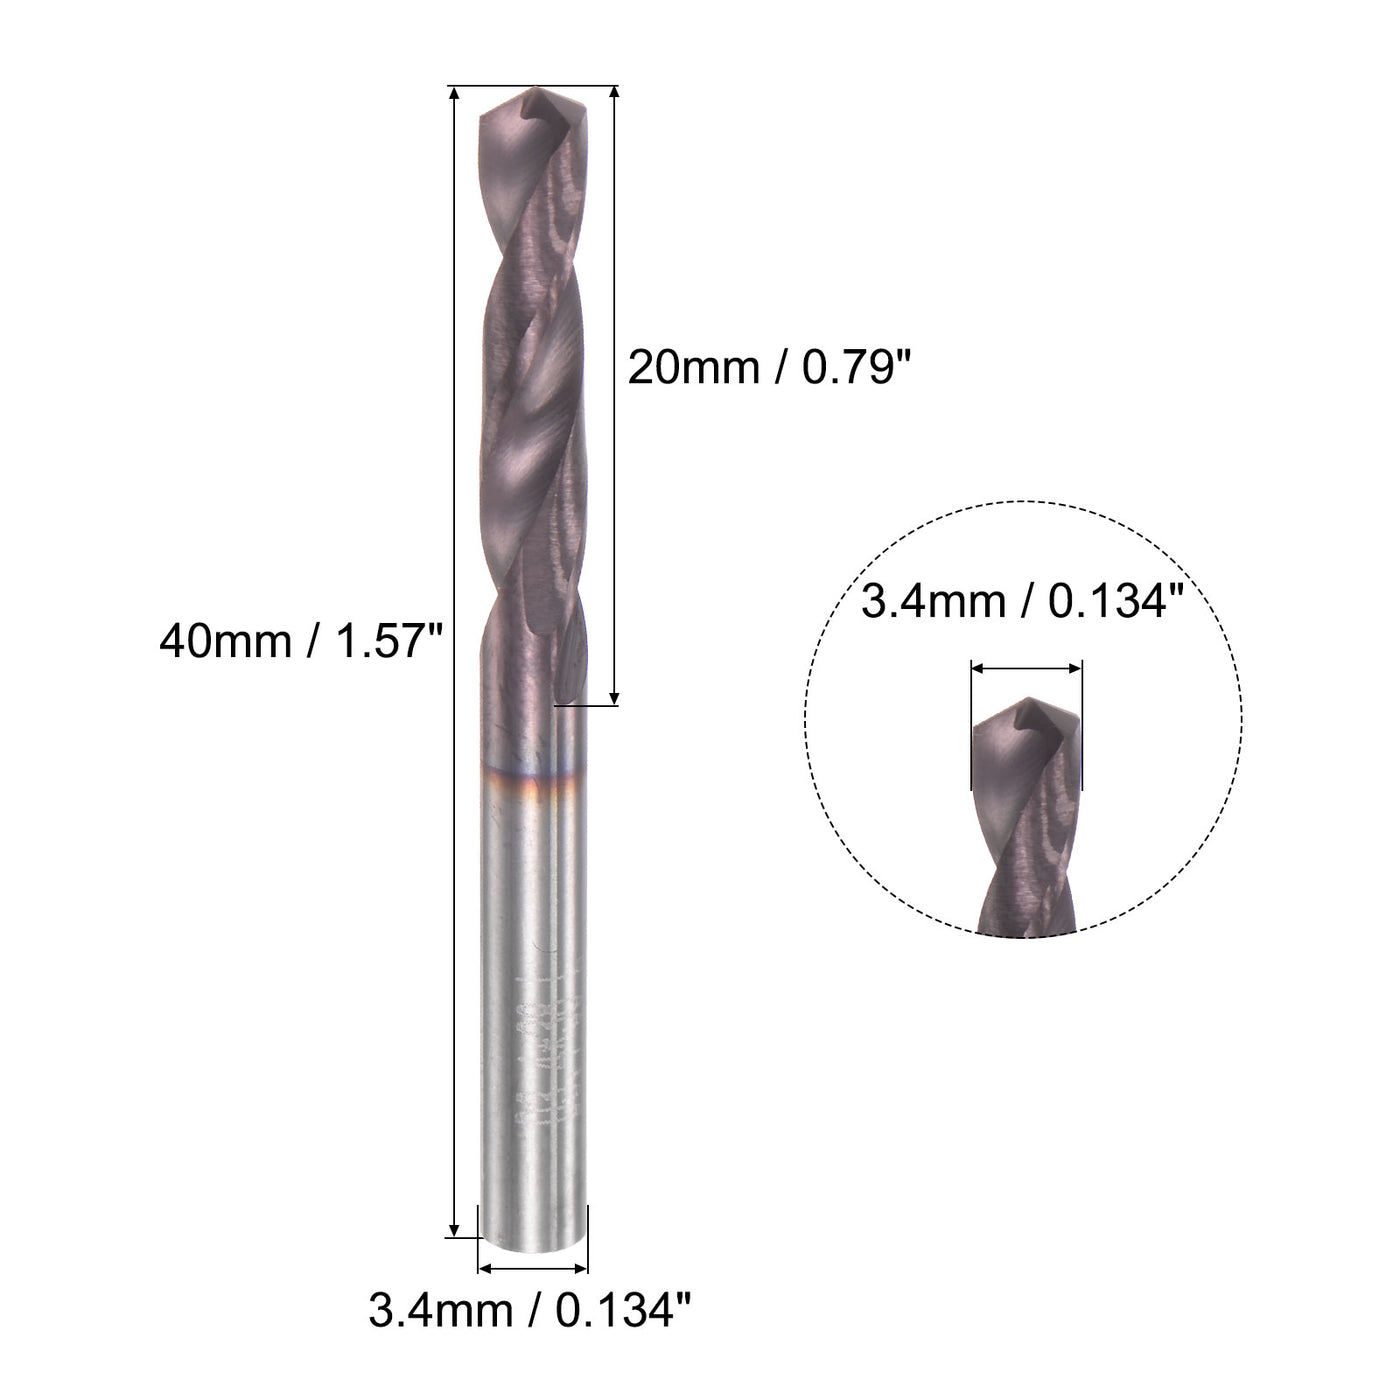 uxcell Uxcell 3.4mm DIN K45 Tungsten Carbide AlTiSin Coated Drill Bit for Stainless Steel